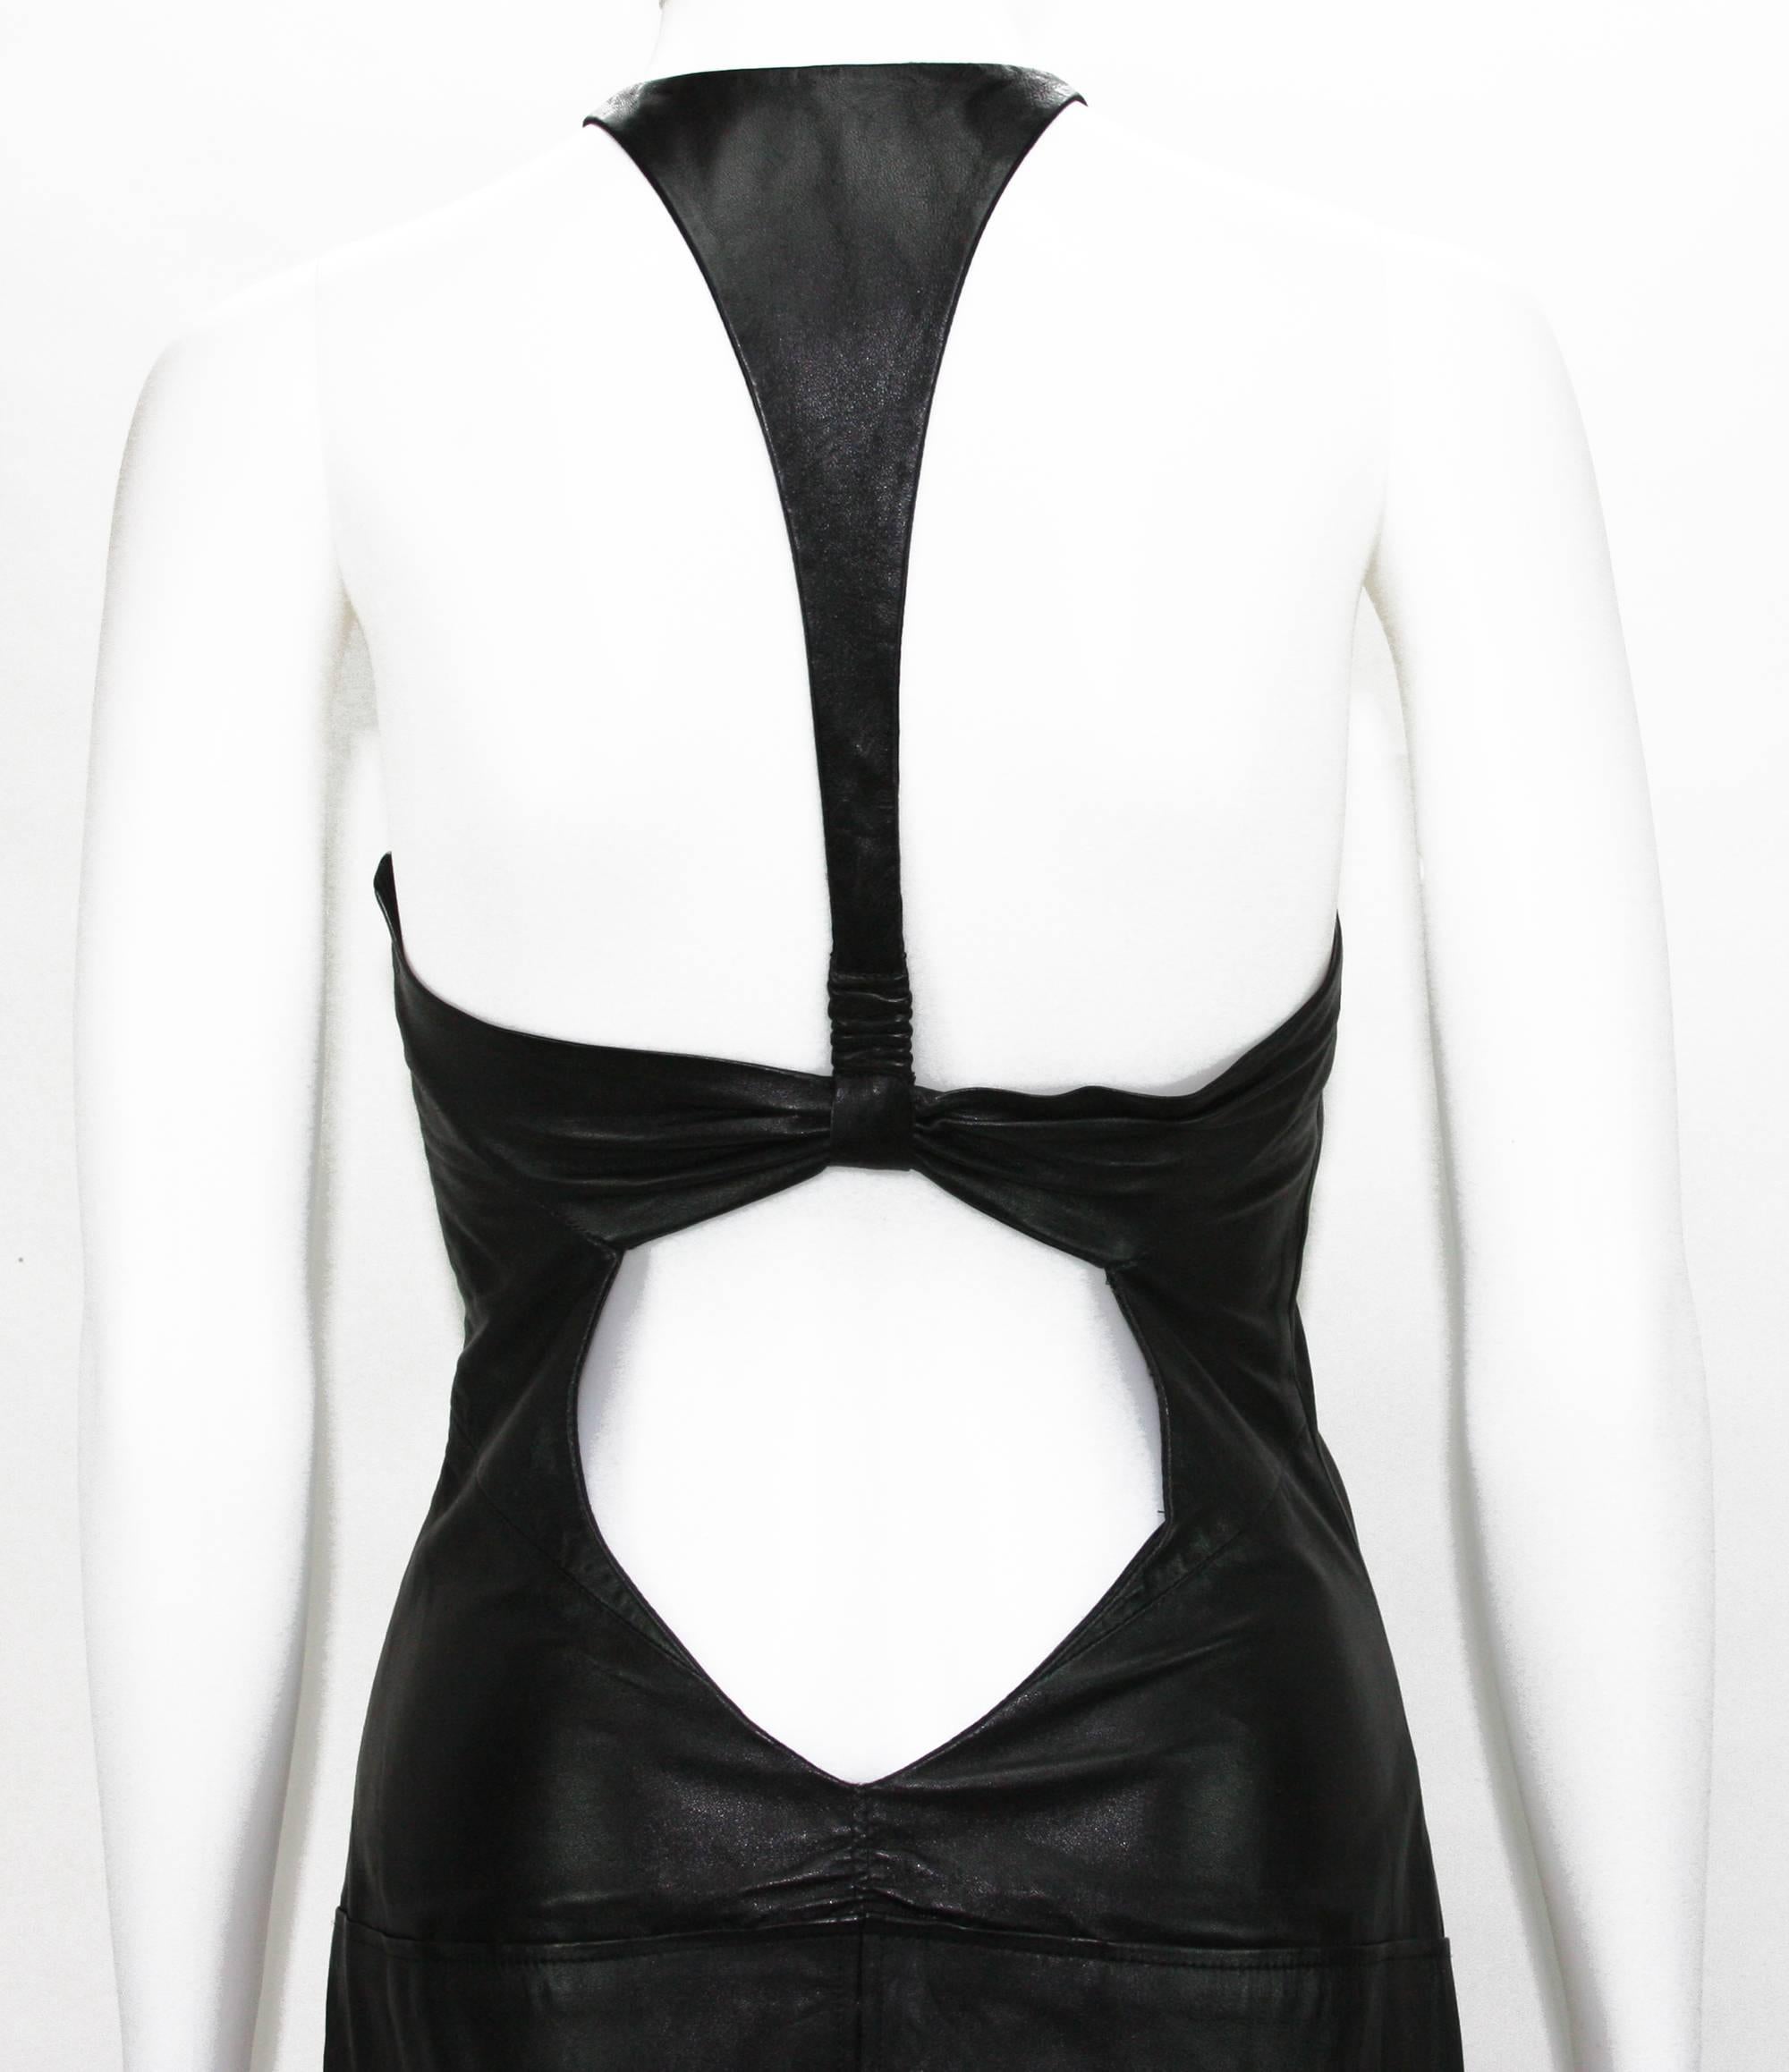 Tom Ford for Gucci 2004 Collection Black Leather Cocktail Dress 44 3